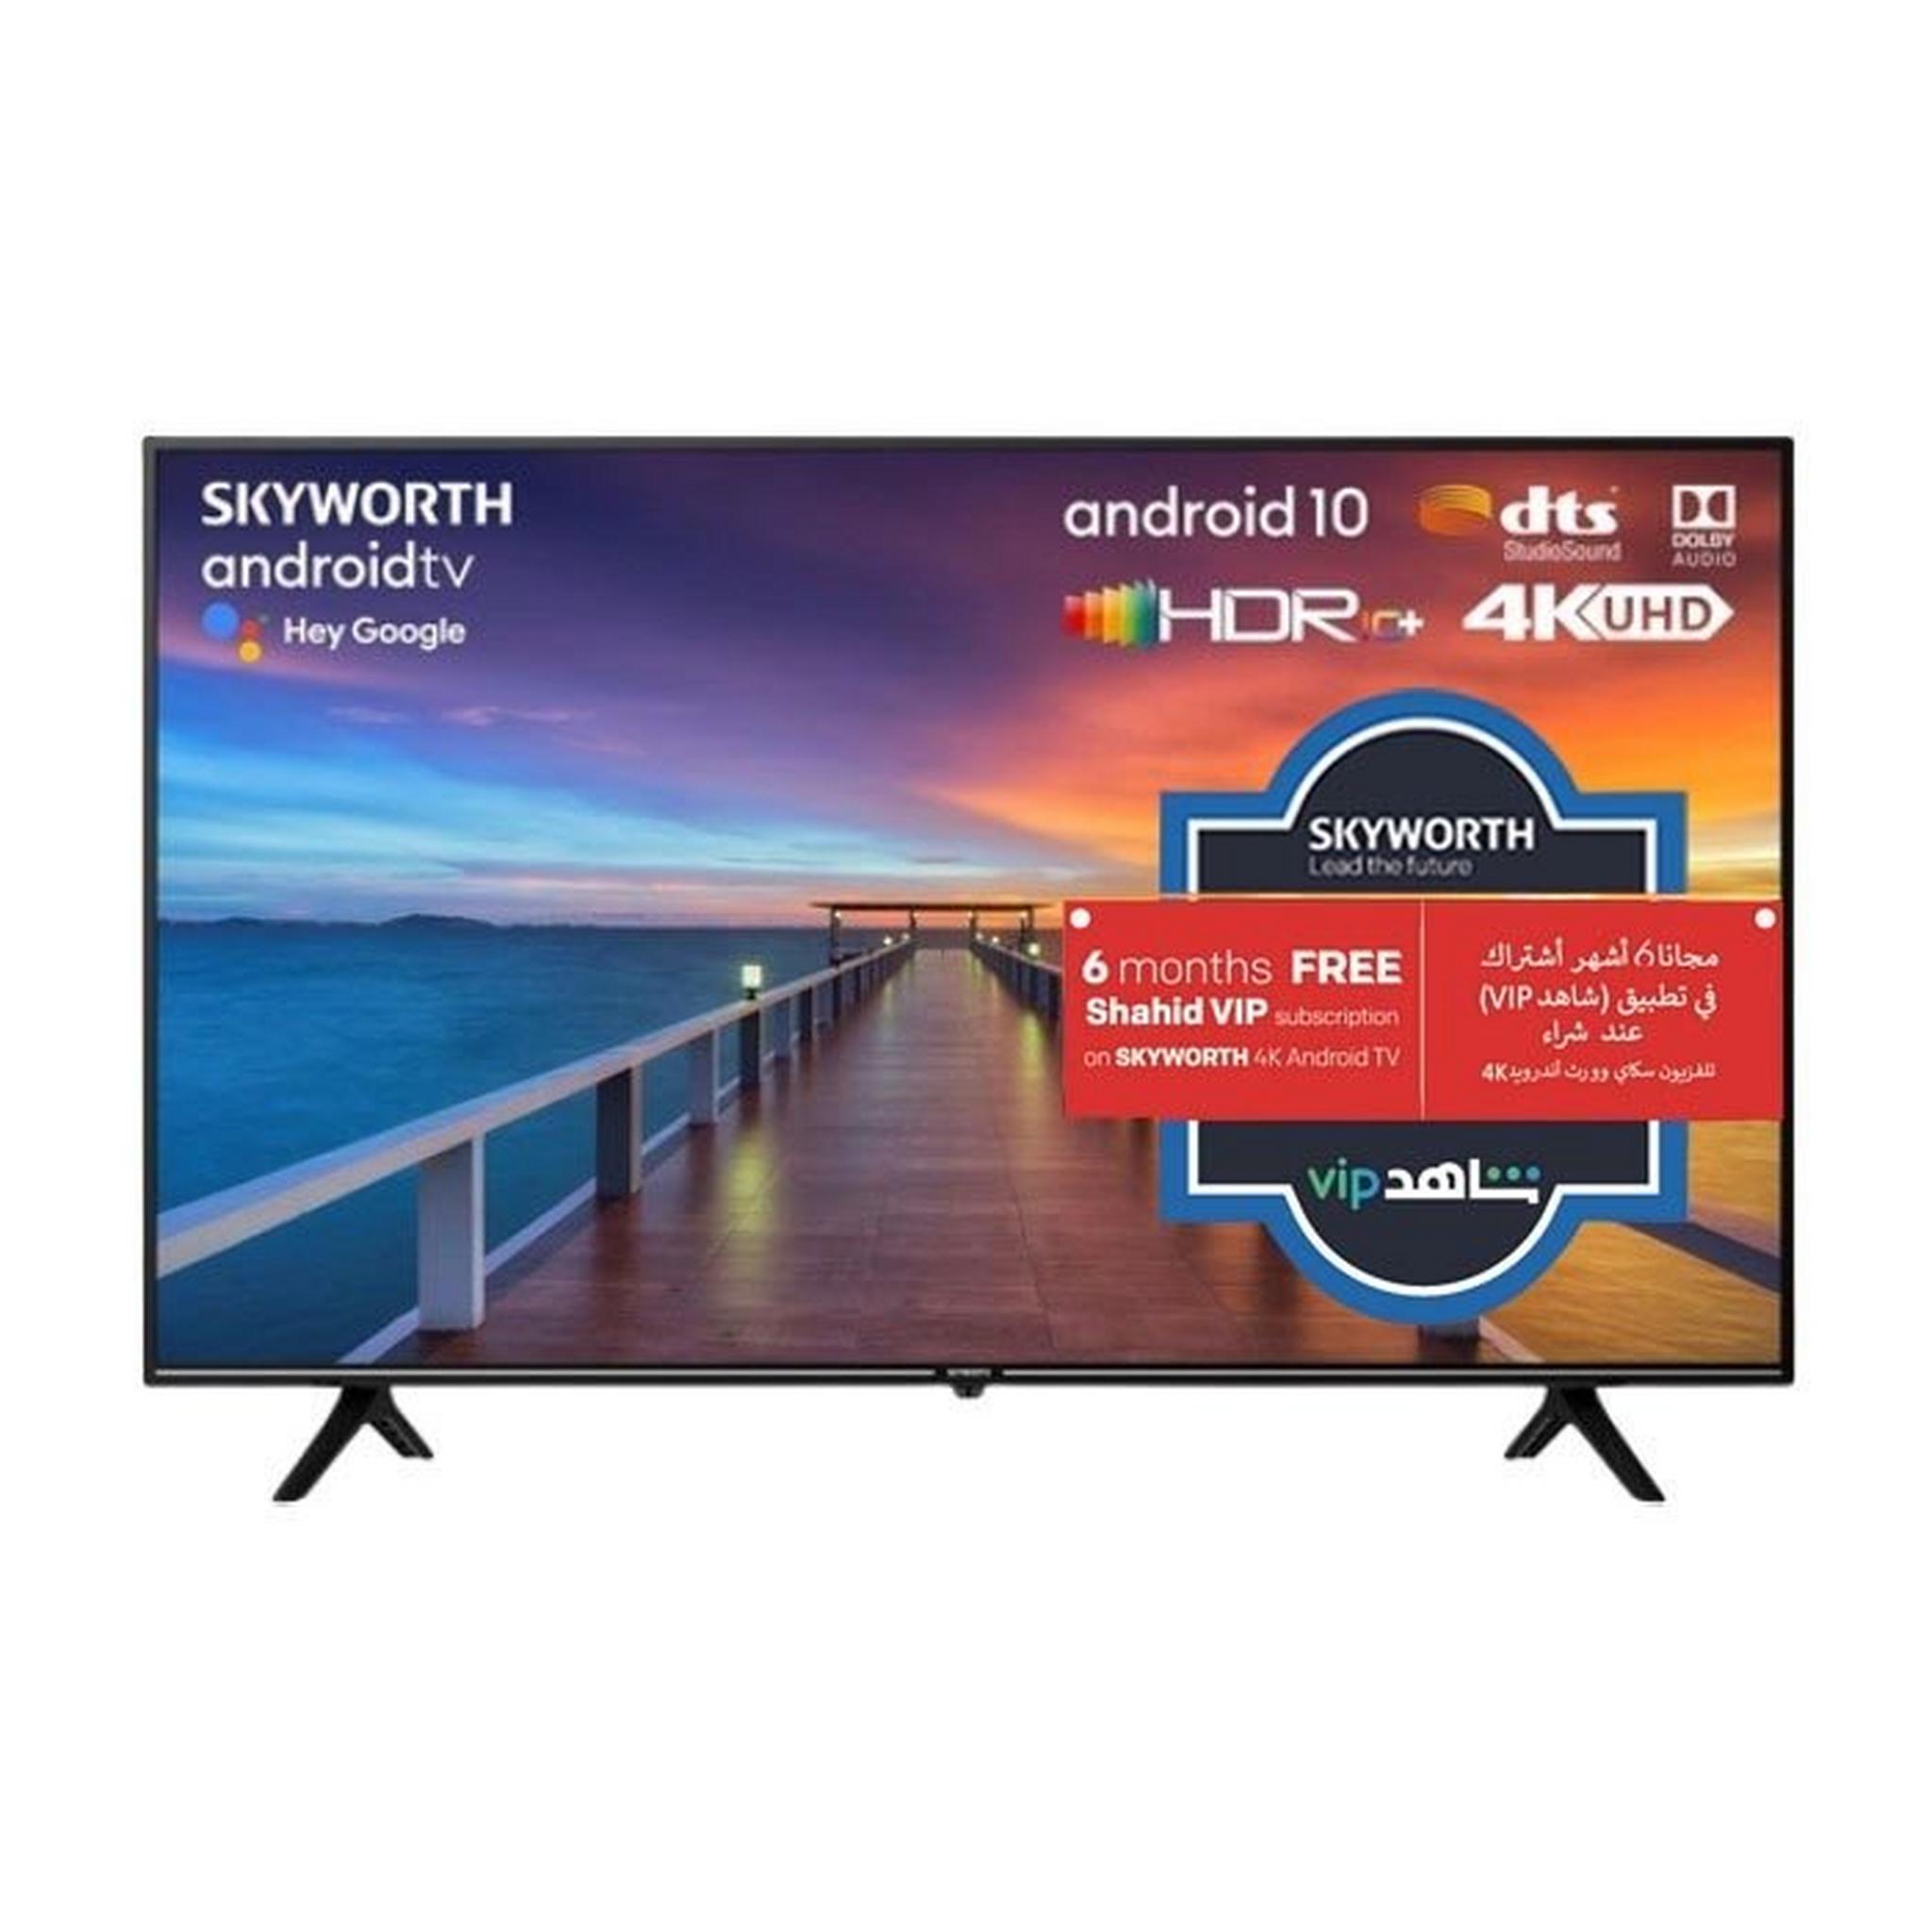 Skyworth 58-inch Android 4K LED TV ( 58SUC8300)